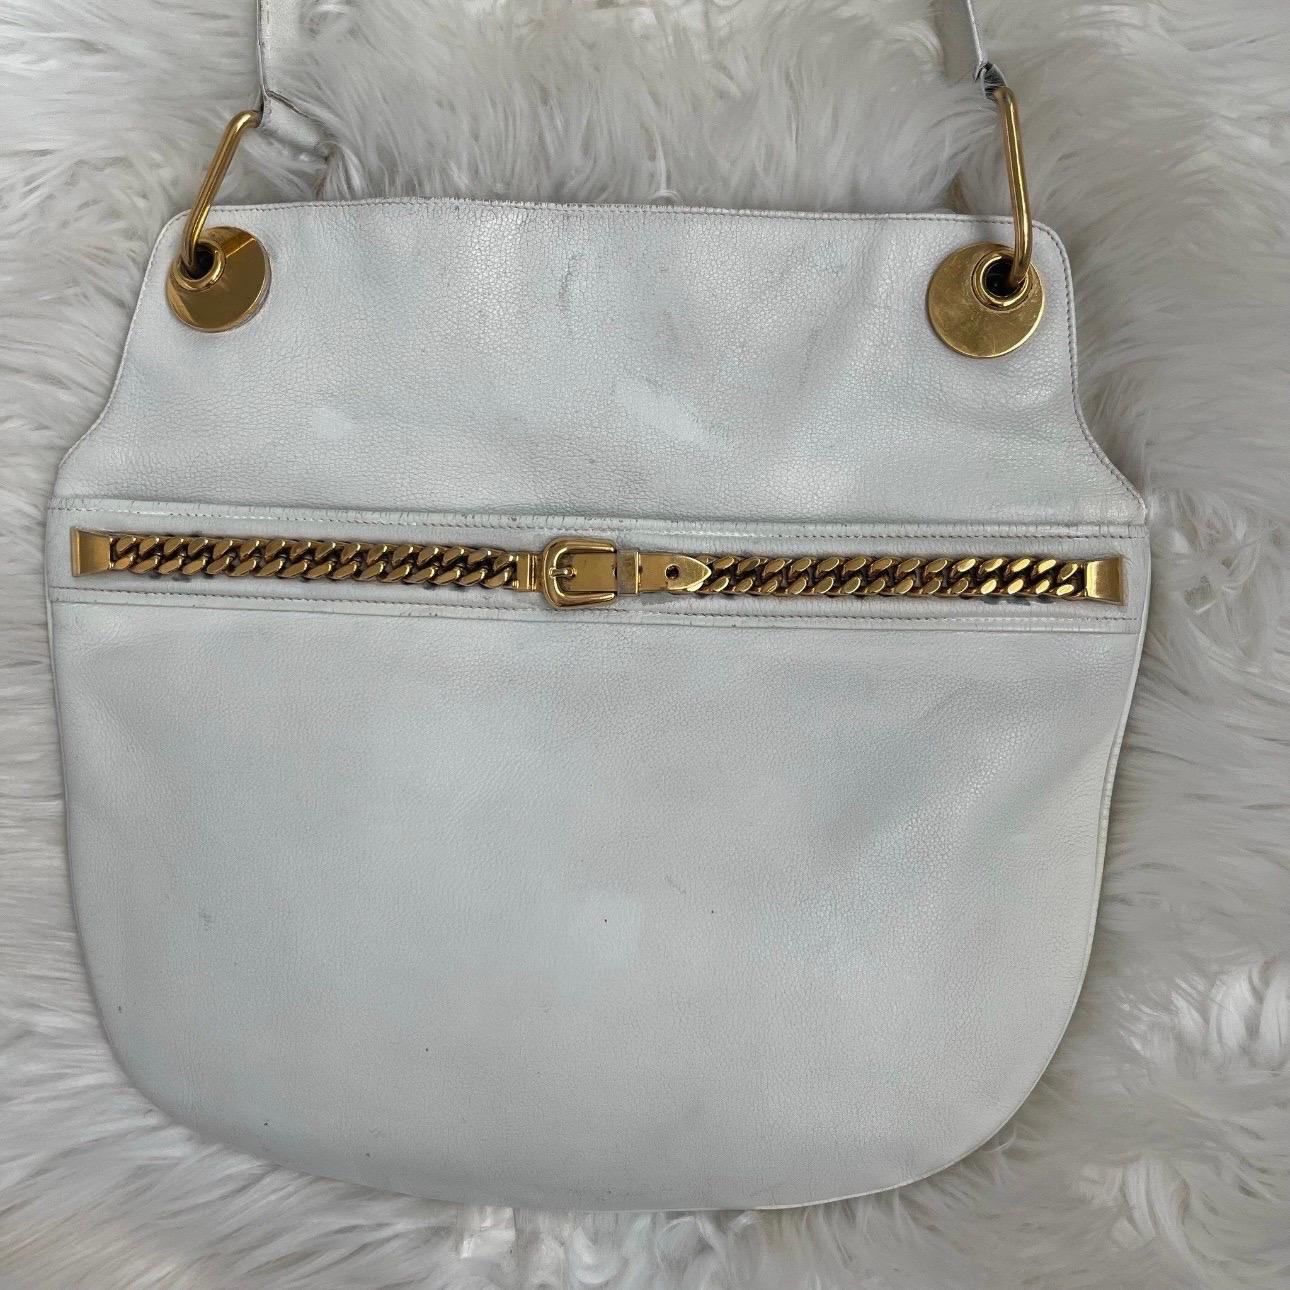 🖤 Vintage 80s Gucci White Shoulder Bag with Gold Belt Chain Across 🖤

This stunning white Gucci bag can fit all the daily necessities such as a phone, small water bottle, wallet, headphones, and more!

This bags exterior is covered with white